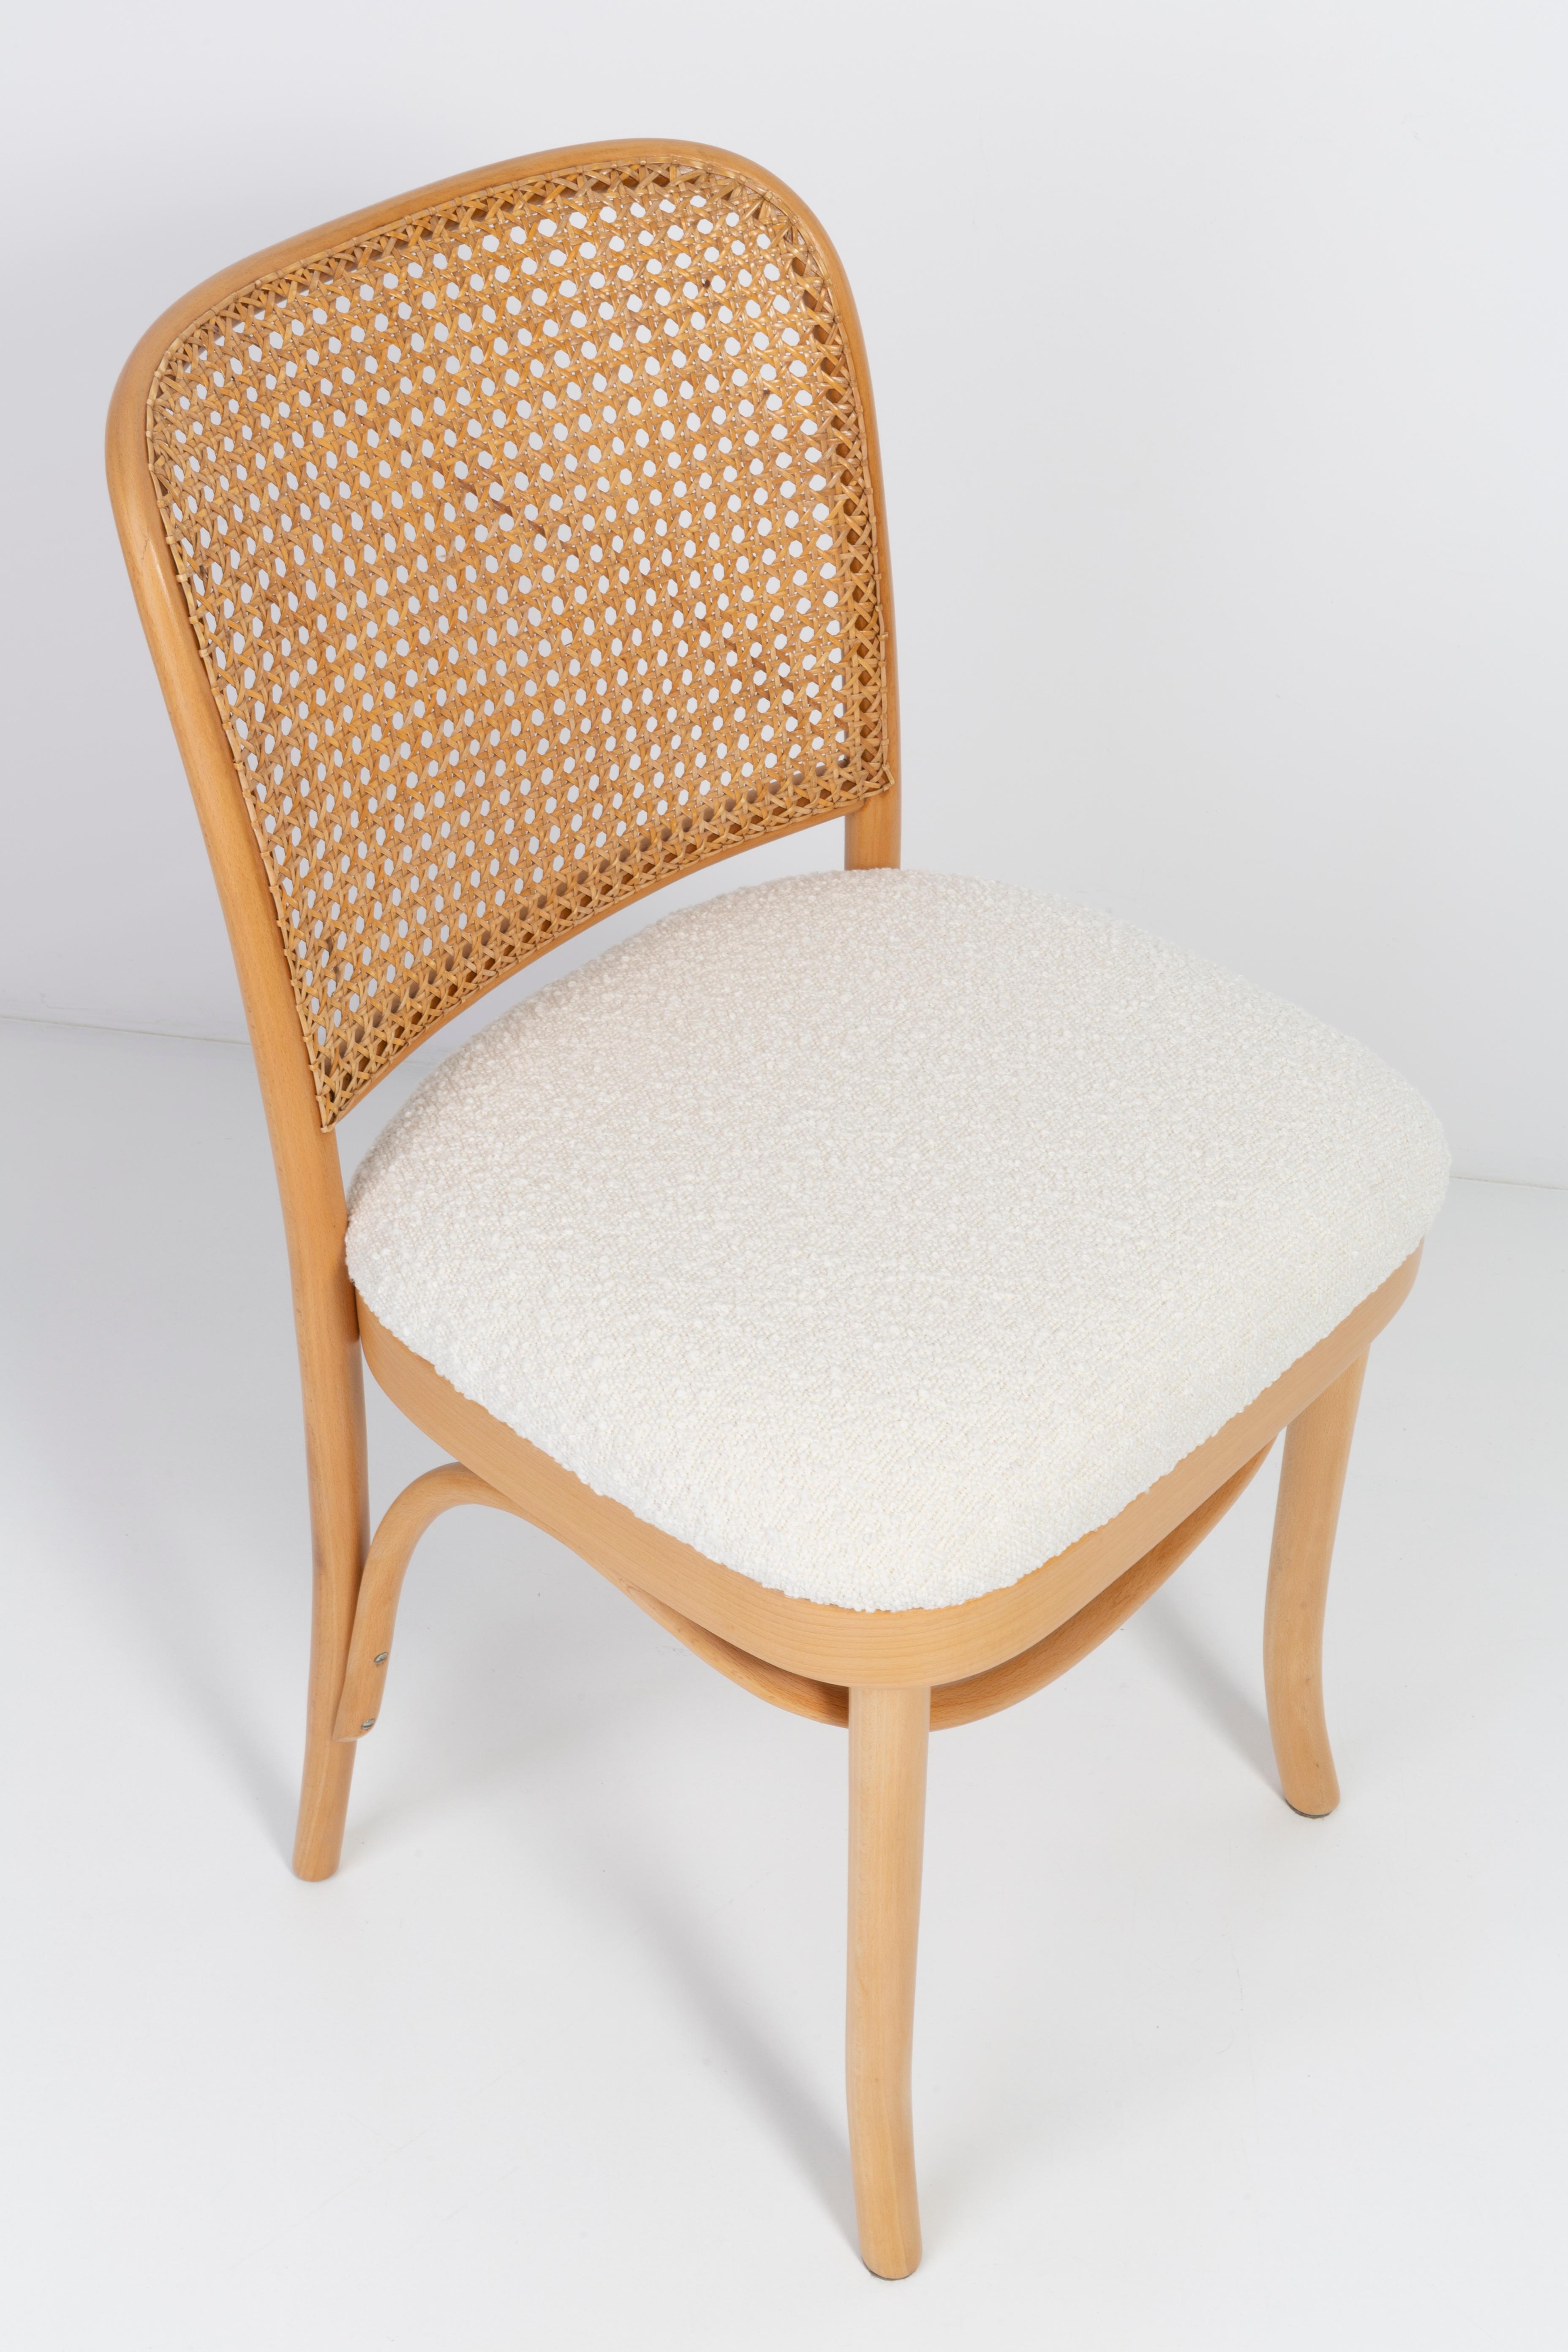 Set of Six White Boucle Thonet Wood Rattan Chairs, 1960s For Sale 1